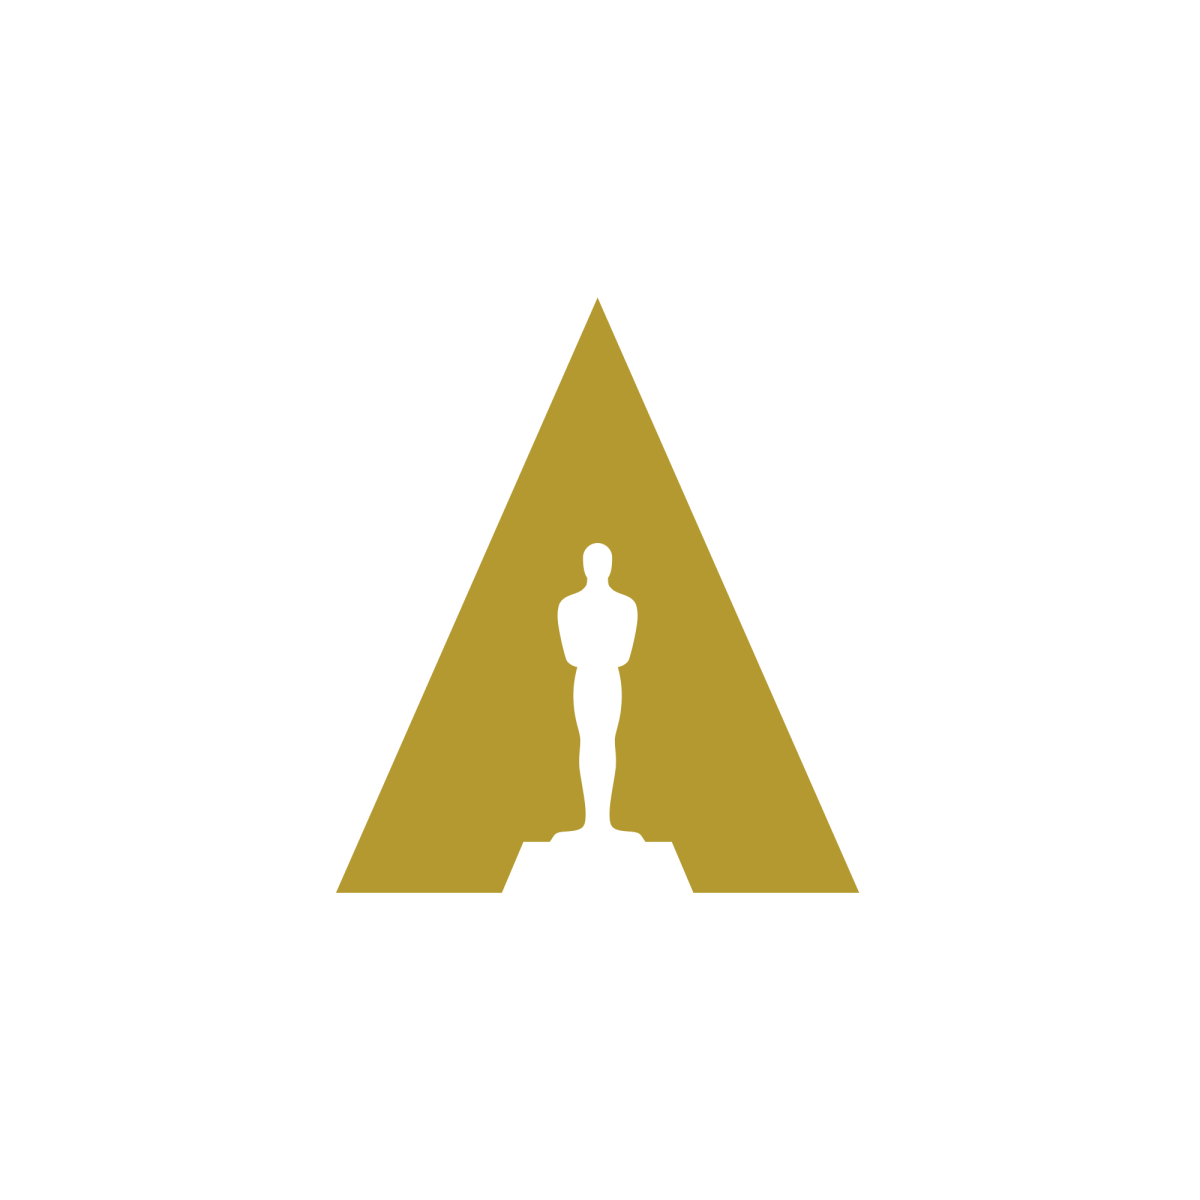 Academy of motion picture and sciences logo